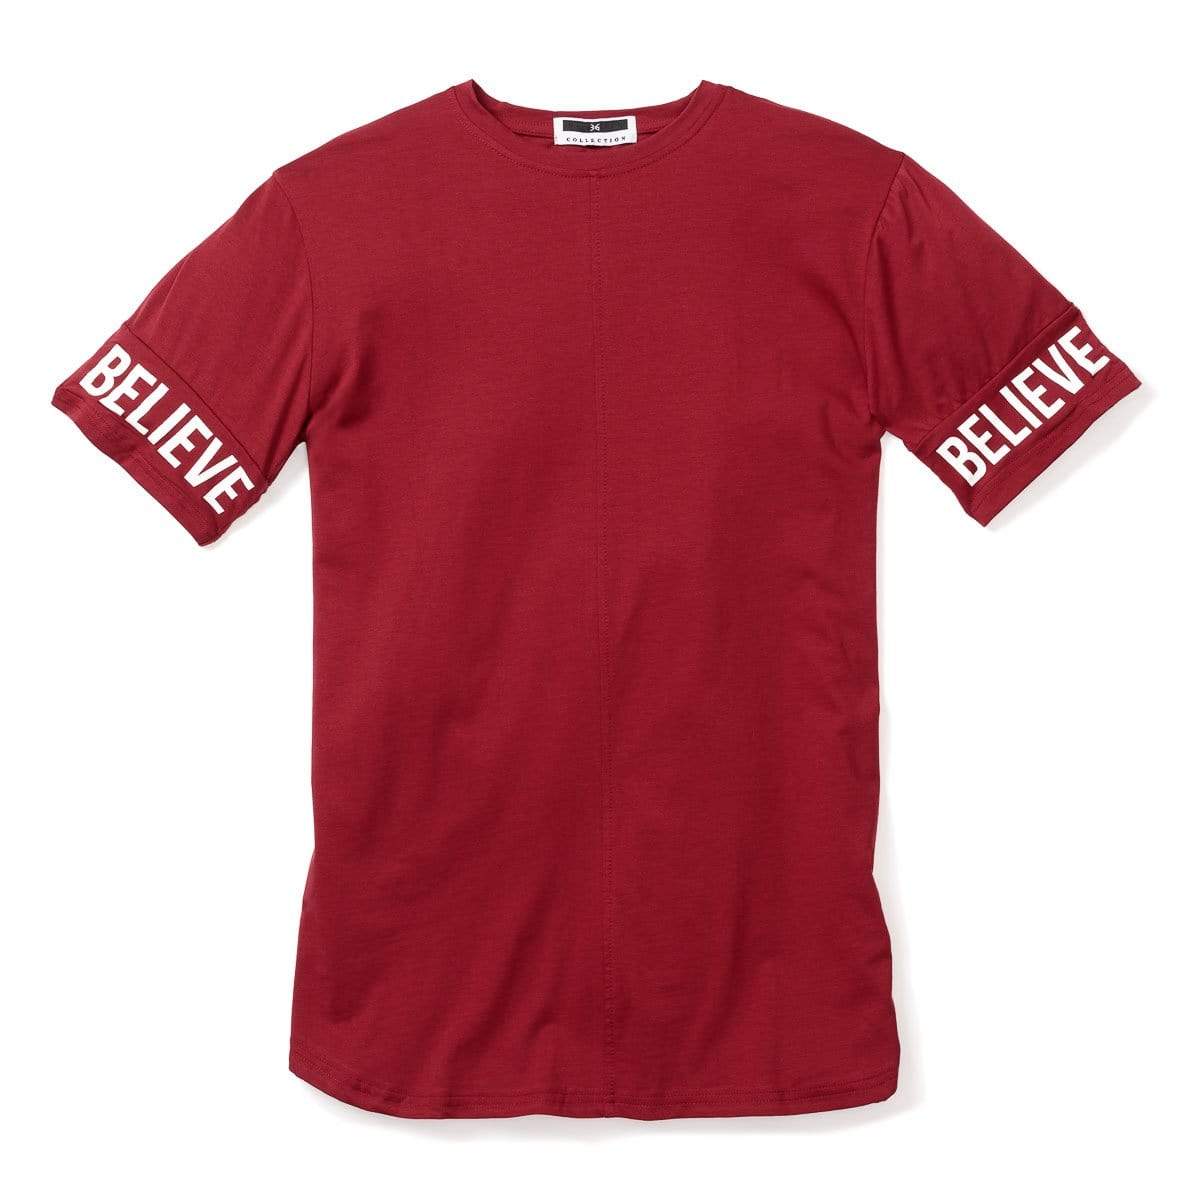 316collection Apparel 3:16 - Believe Sleeve Tee - Maroon Red